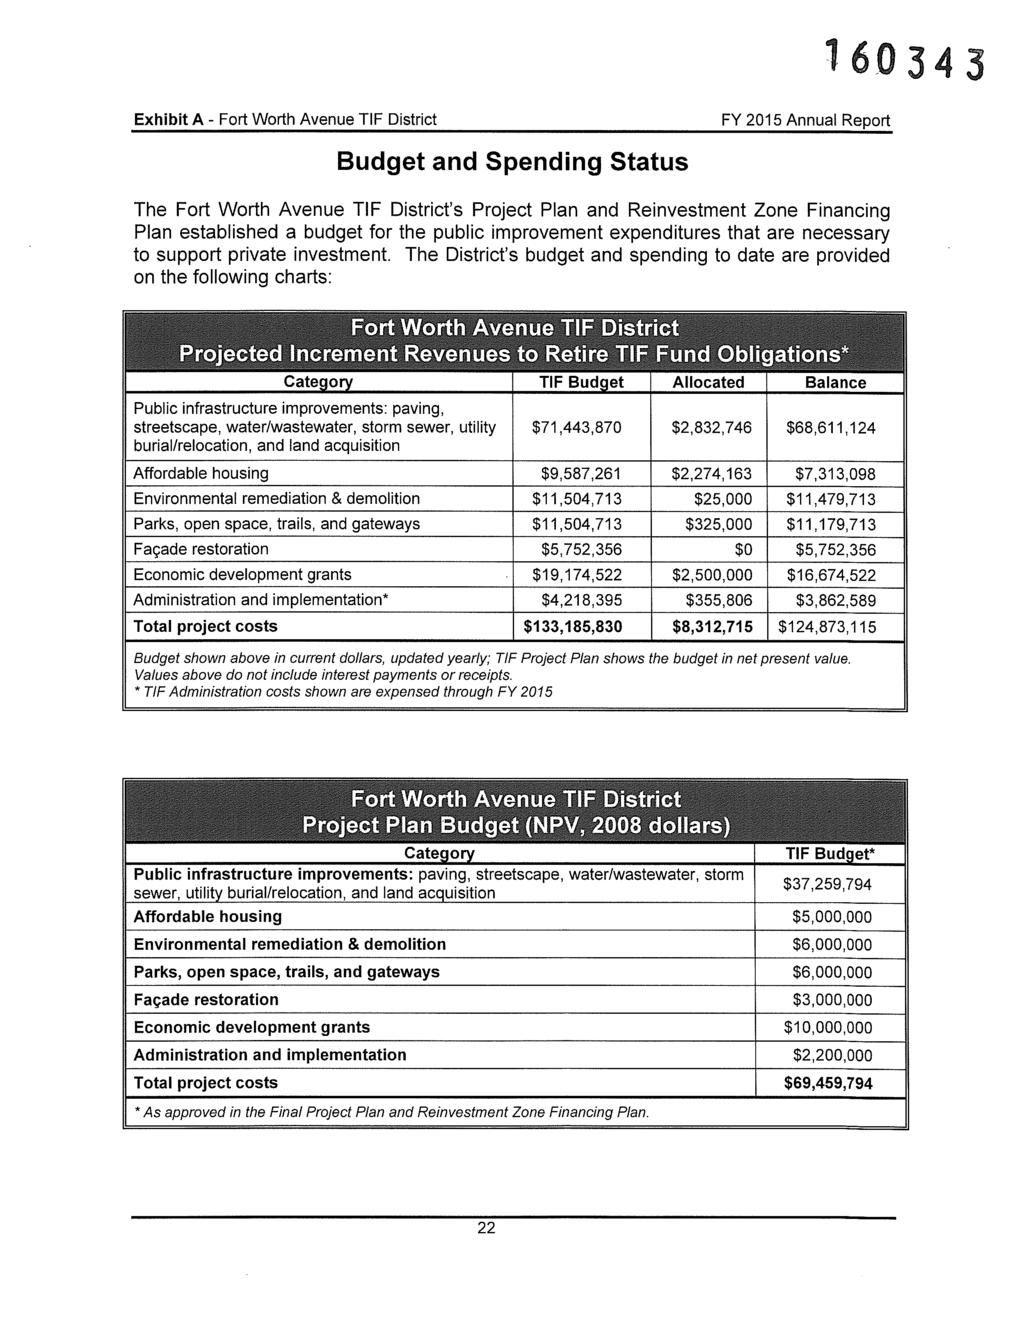 Exhibit A - Fort Worth Avenue TIE District Budget and Spending Status The Fort Worth Avenue TIE District s Project Plan and Reinvestment Zone Financing Plan established a budget for the public